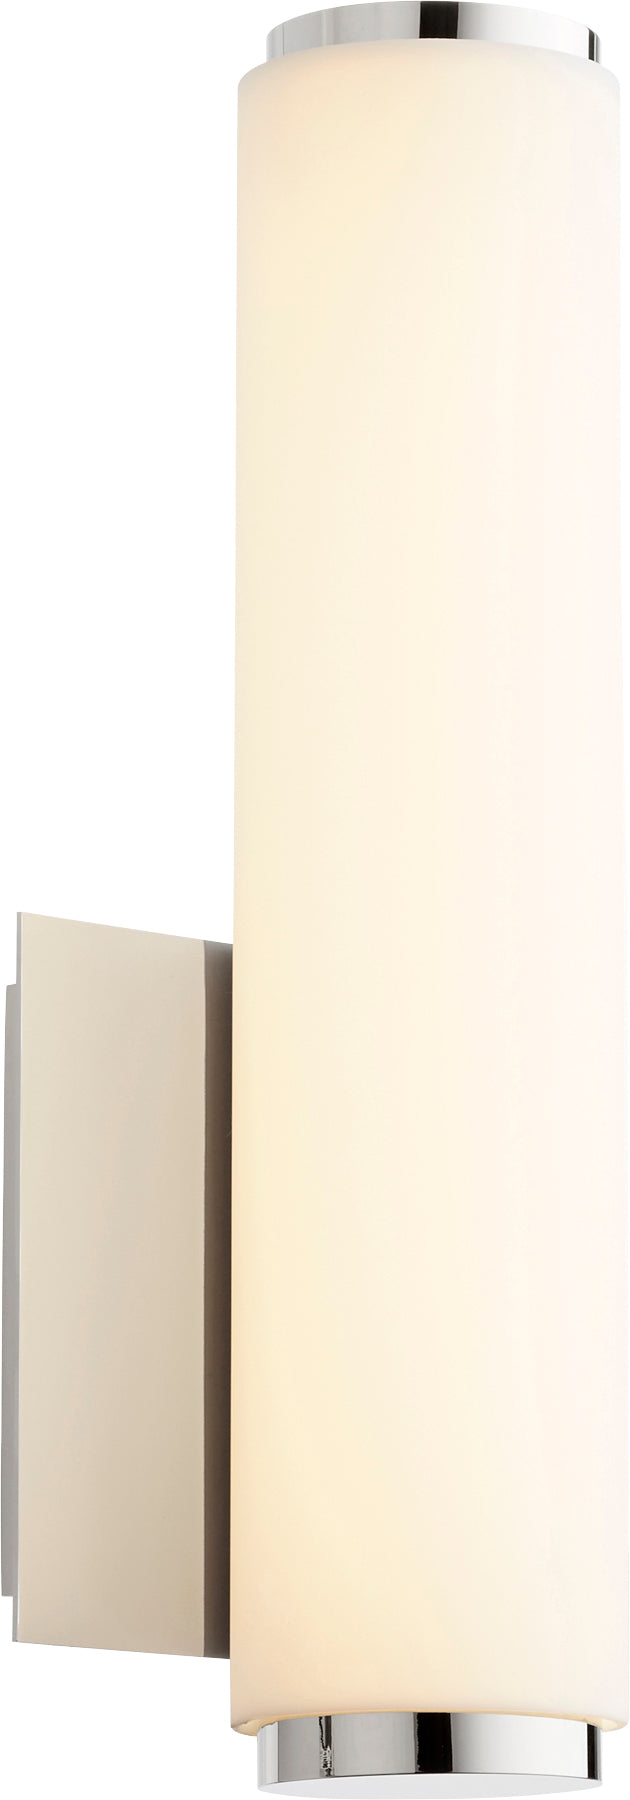 1 Light Modern and Contemporary Polished Nickel Matte White Acrylic LED Wall Sconce